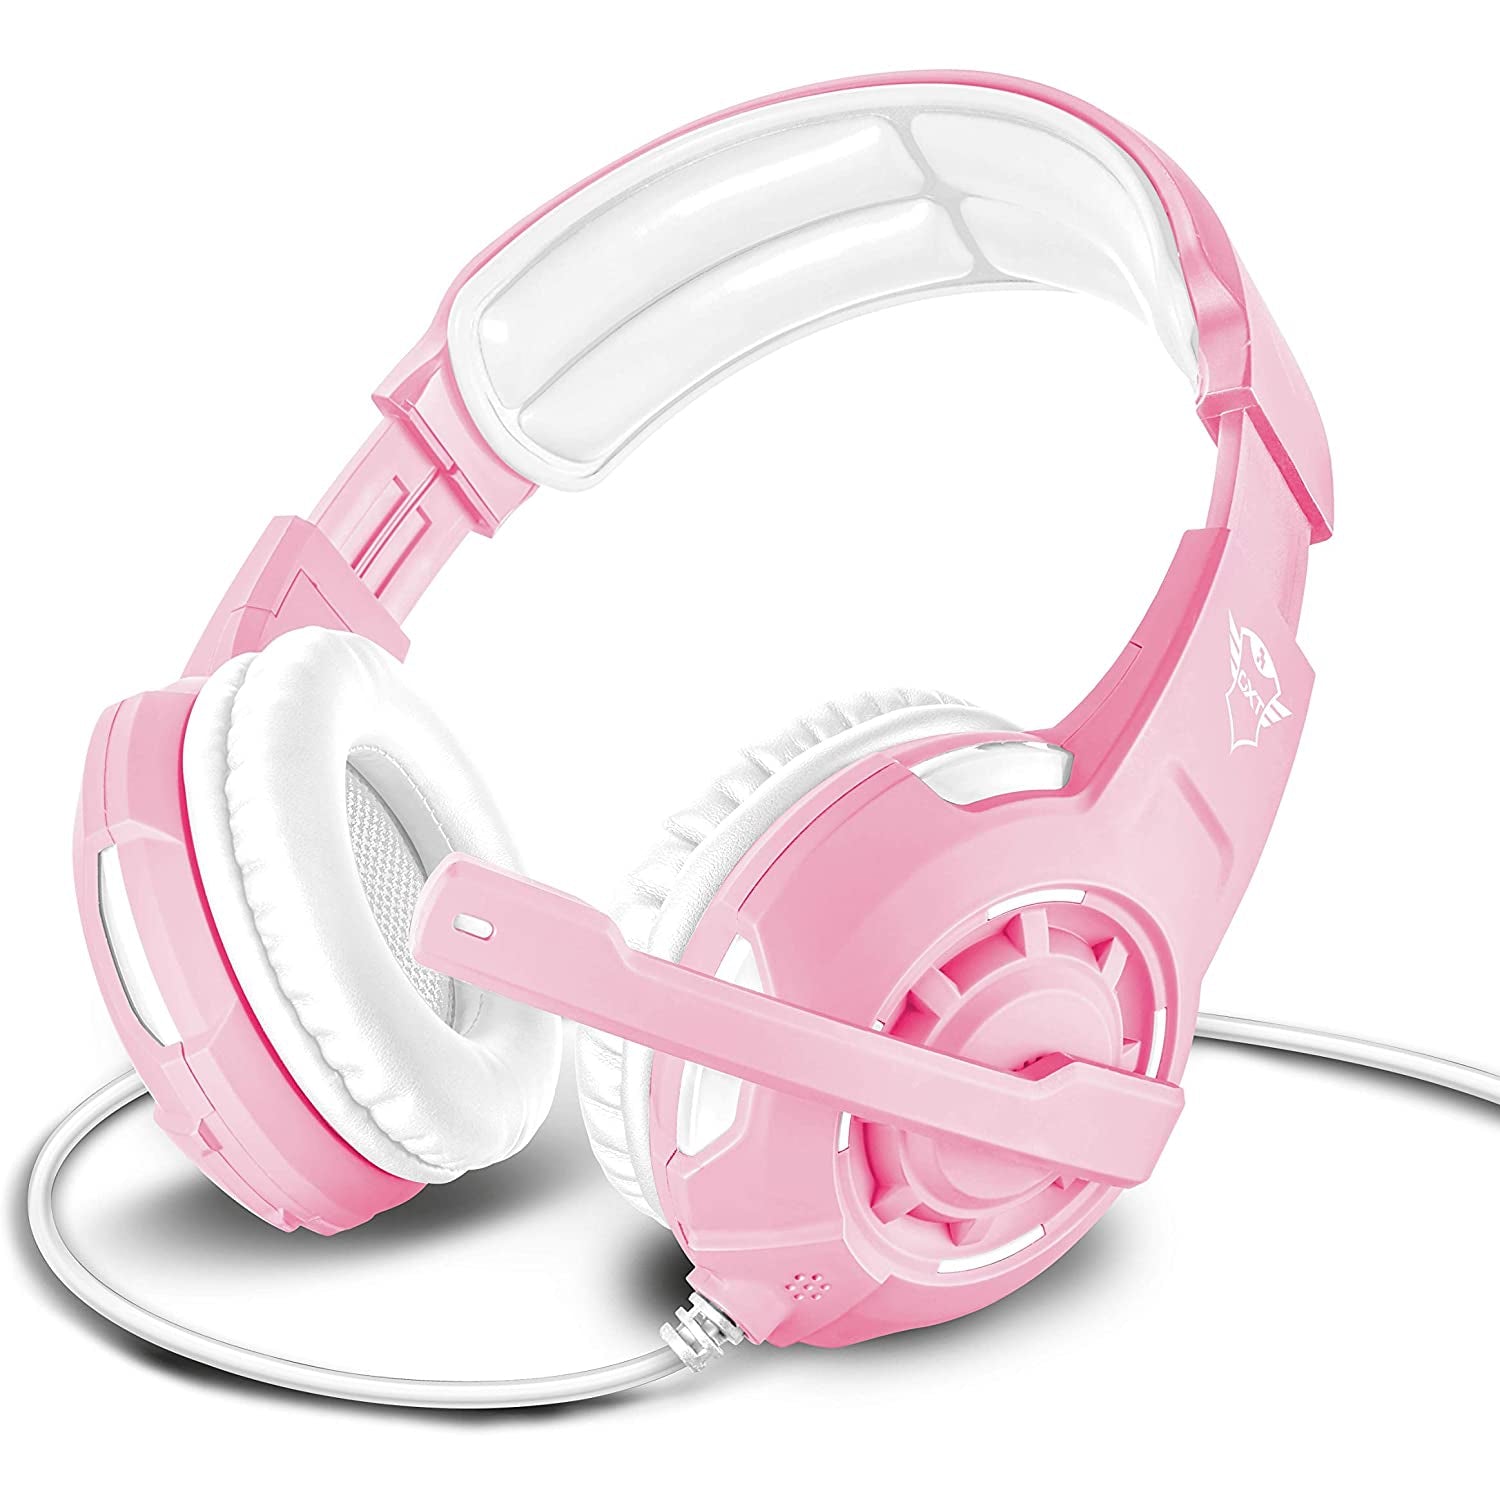 Trust Gaming Headset GXT 310P Radius with Microphone, Adjustable Mic and Headband for Consoles - Pink